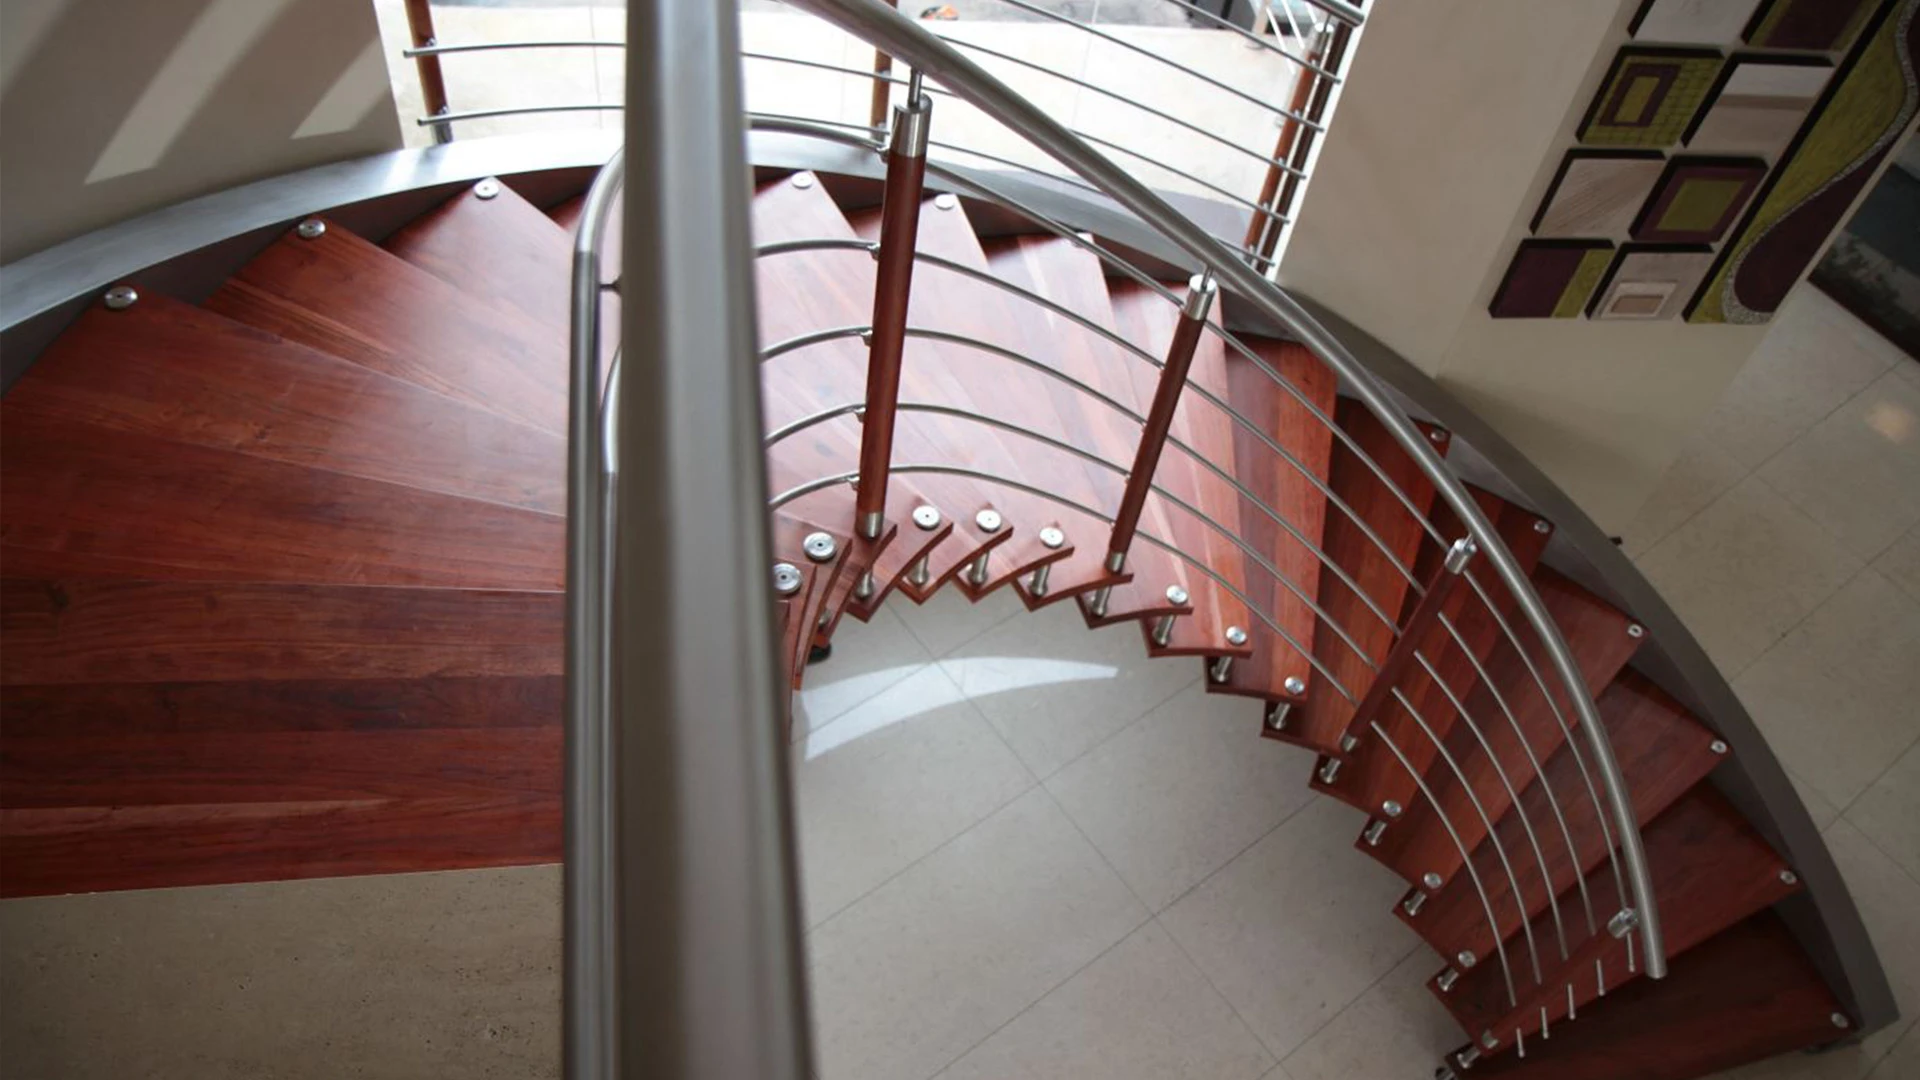 Contact Us to discuss your needs for a new Staircase.